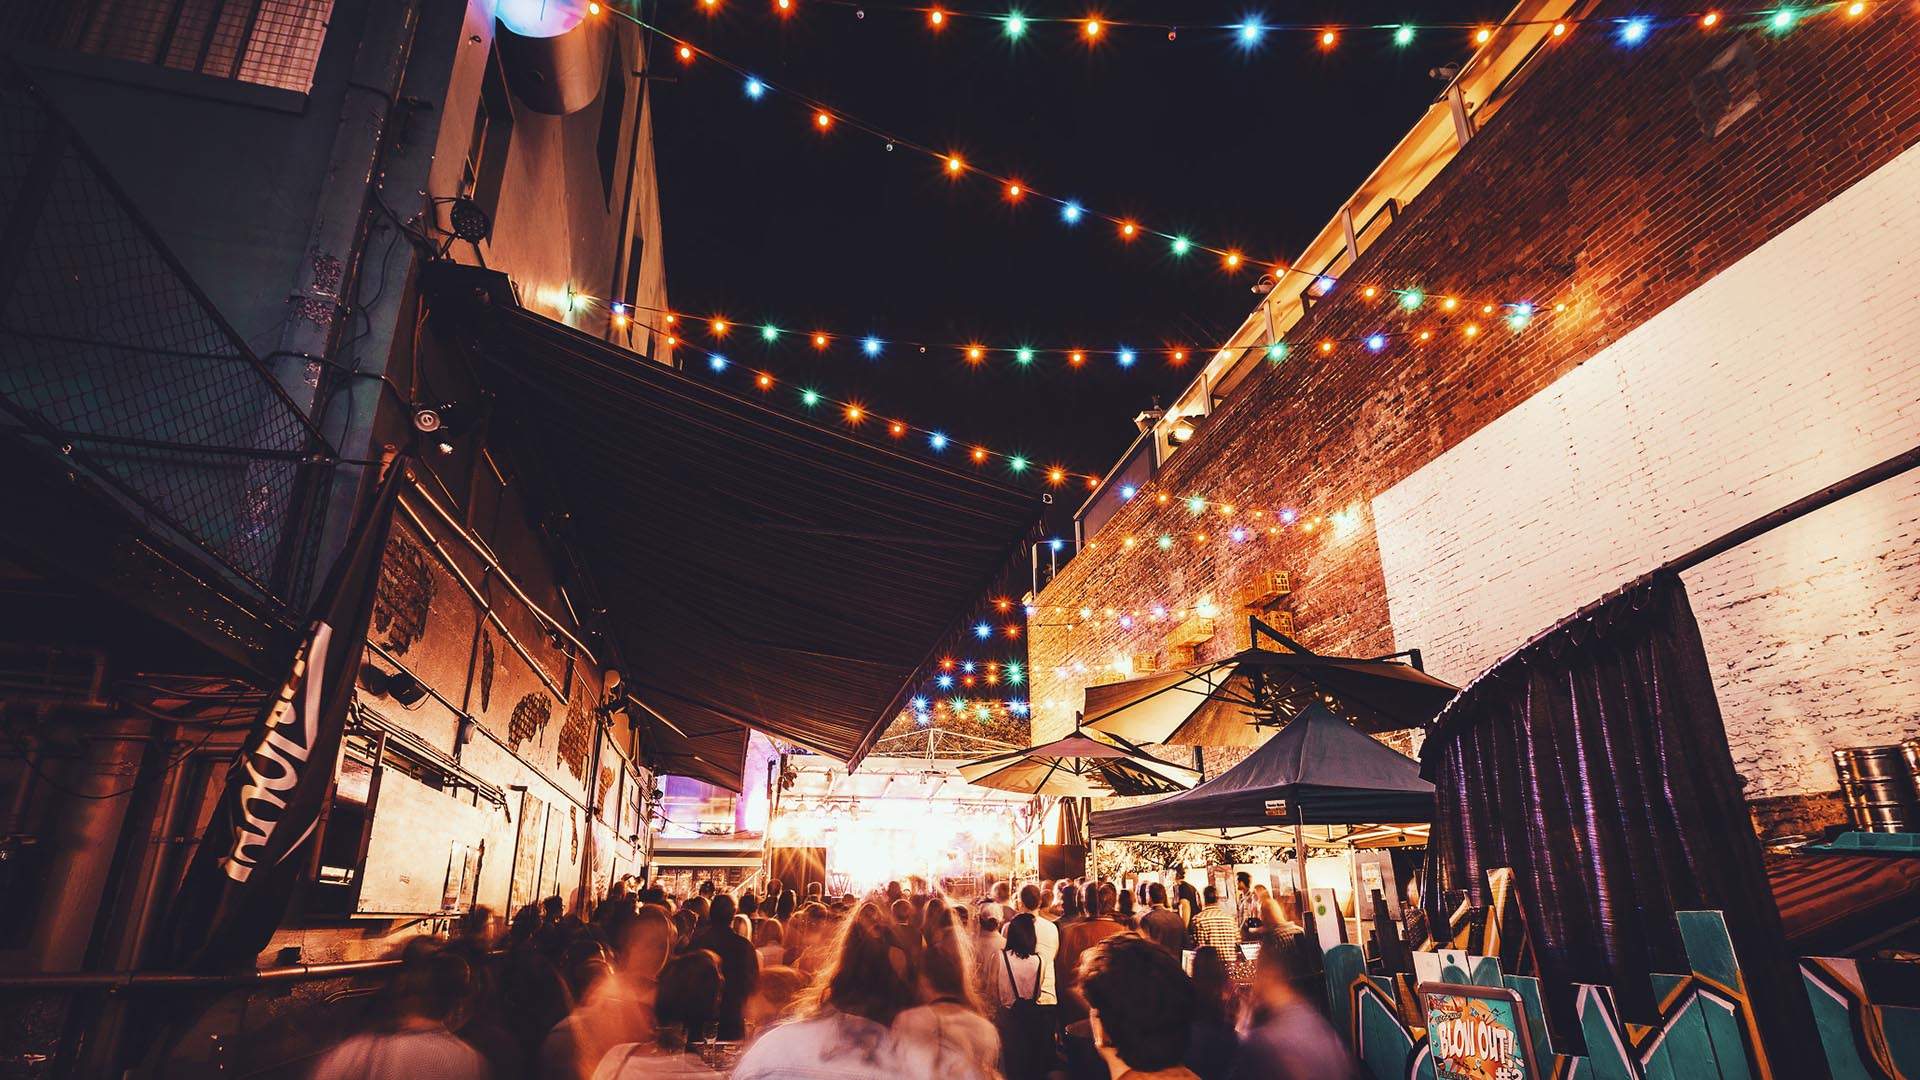 A Weekender's Guide to Brisbane During BIGSOUND